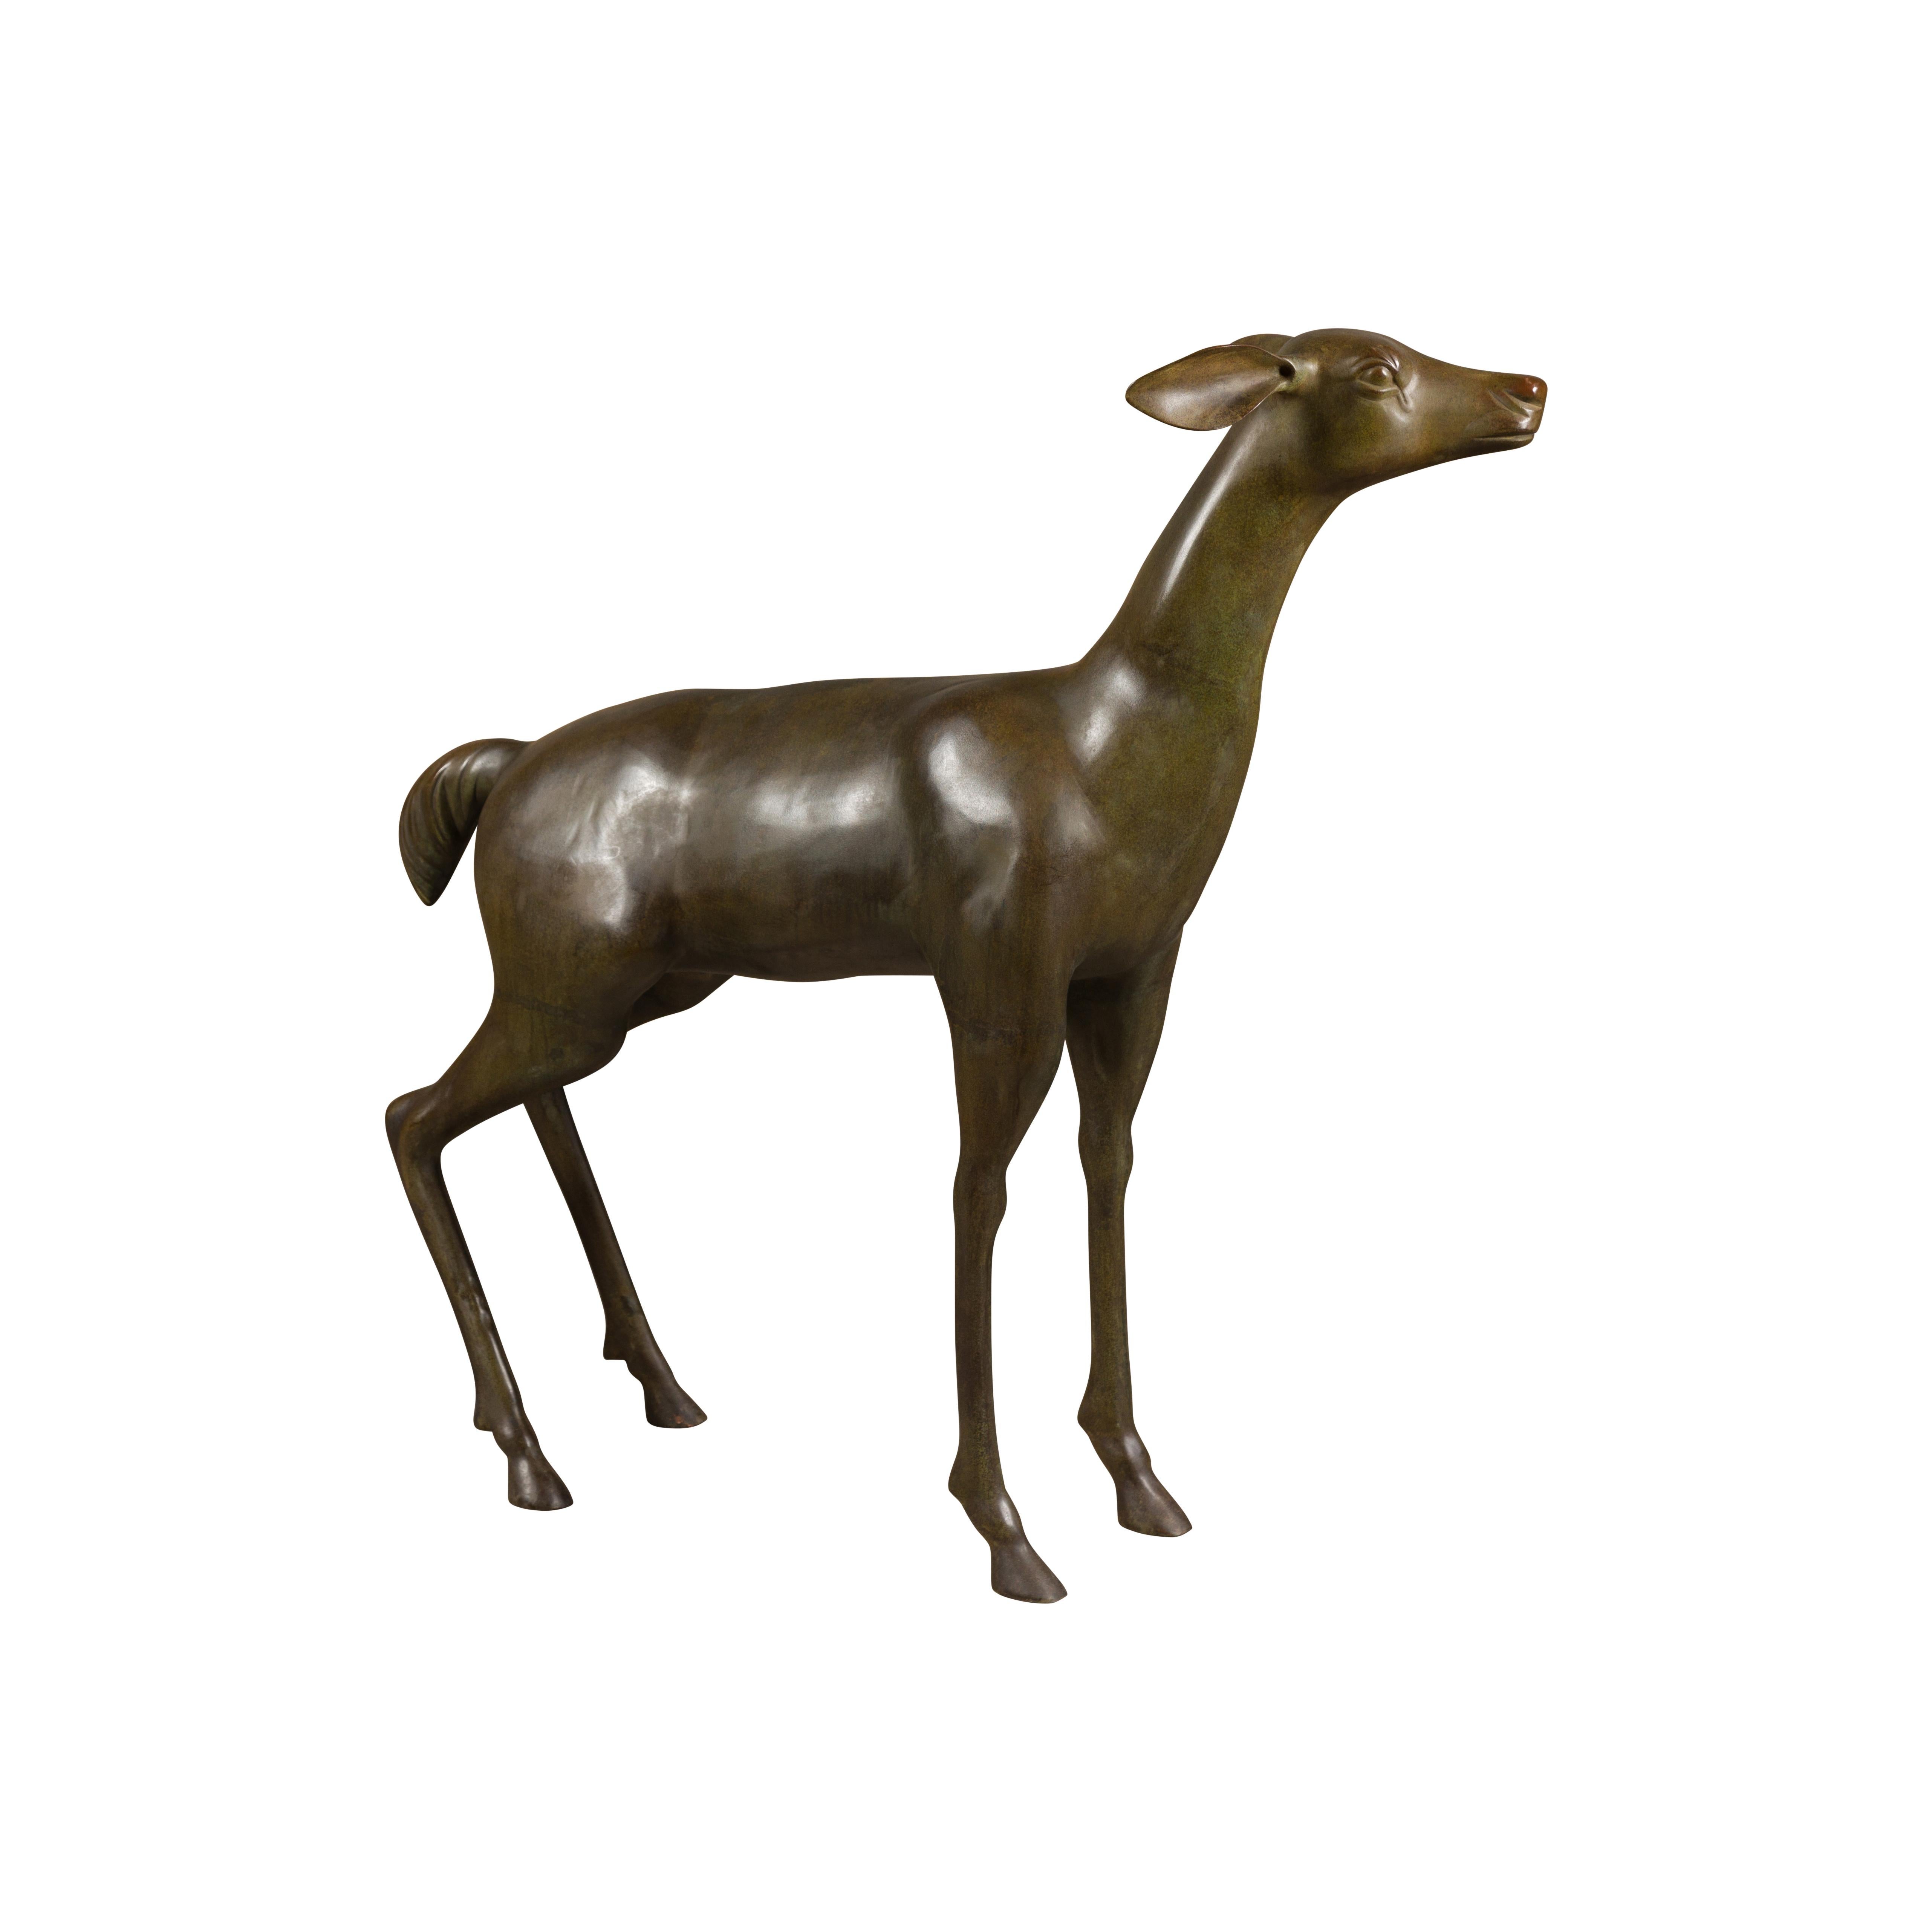 Continental 1930s Life Size Bronze Sculpture of a Deer Standing on its Four Legs For Sale 7